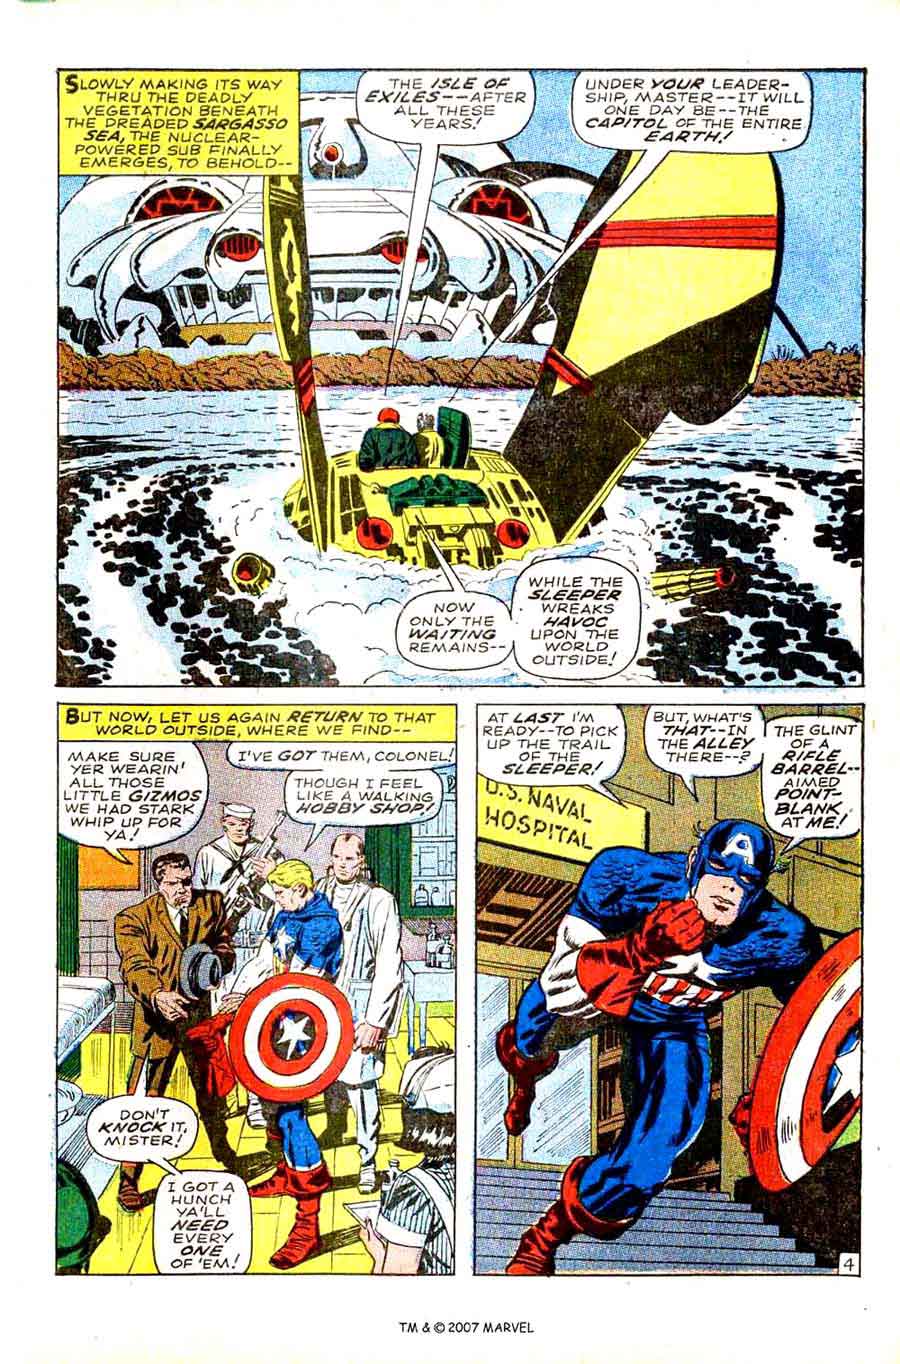 Captain America v1 #102 marvel comic book page art by Jack Kirby